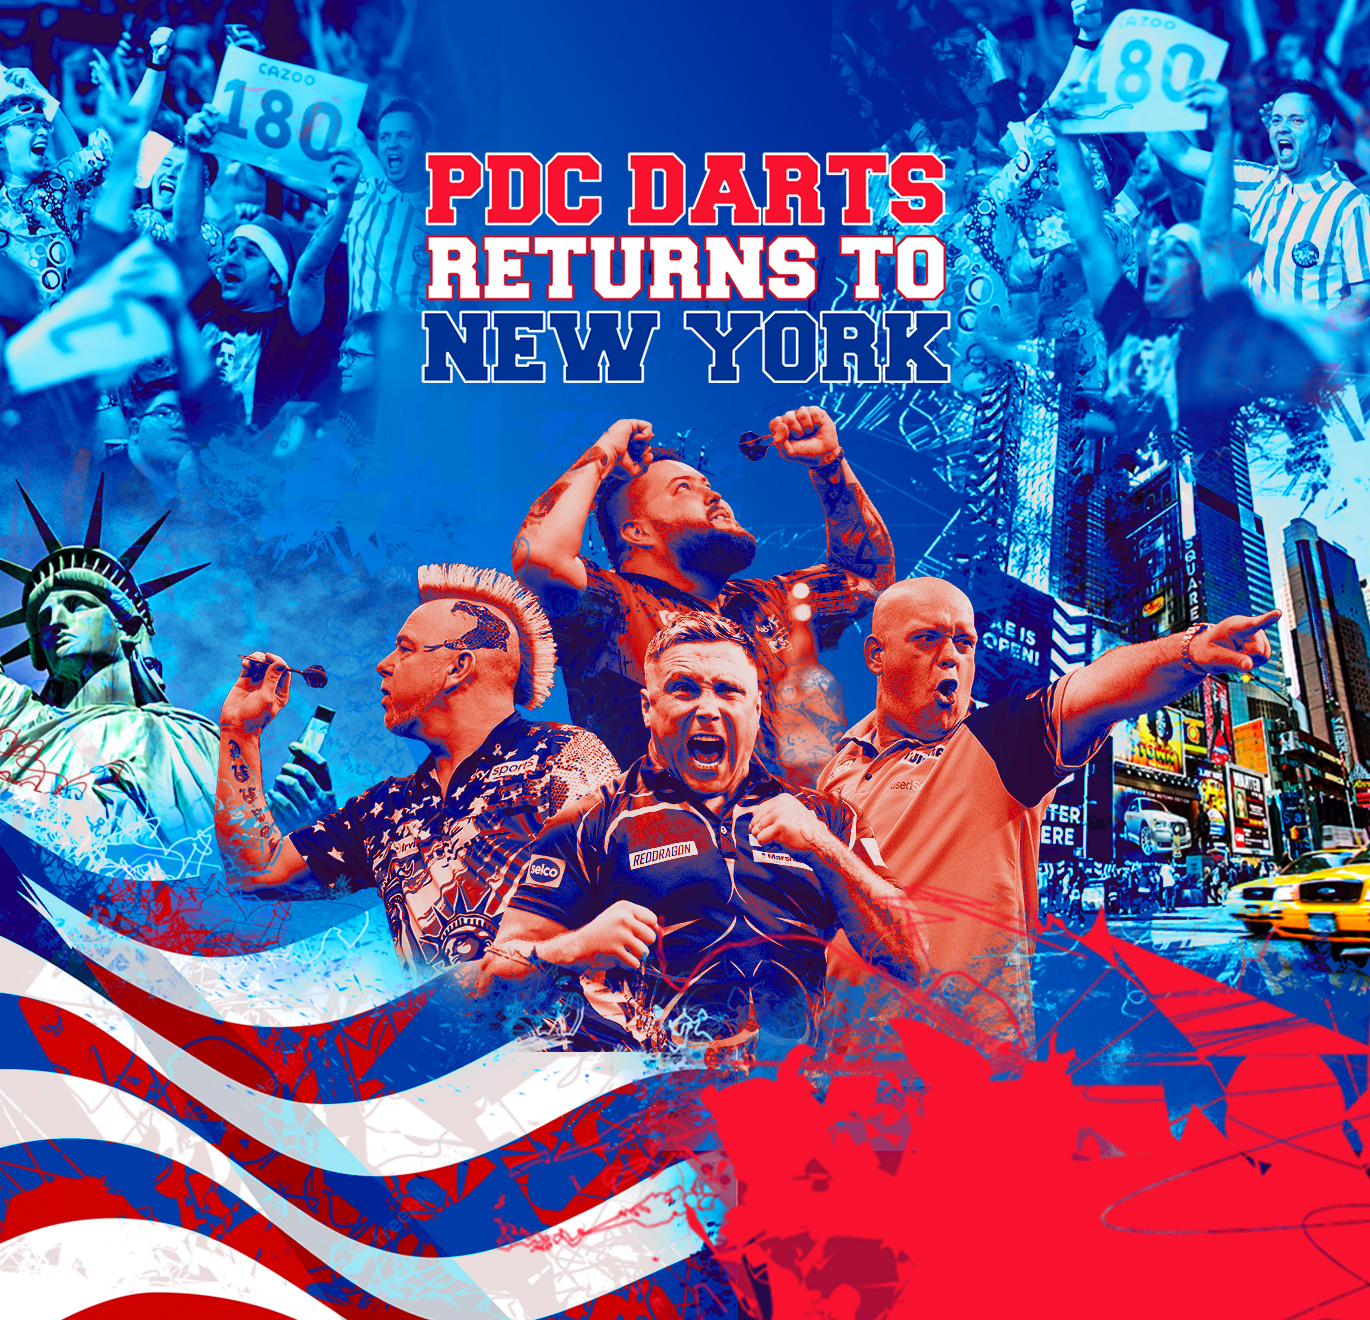 bet365 US Darts Master Tickets | The Theater at Madison Square Garden